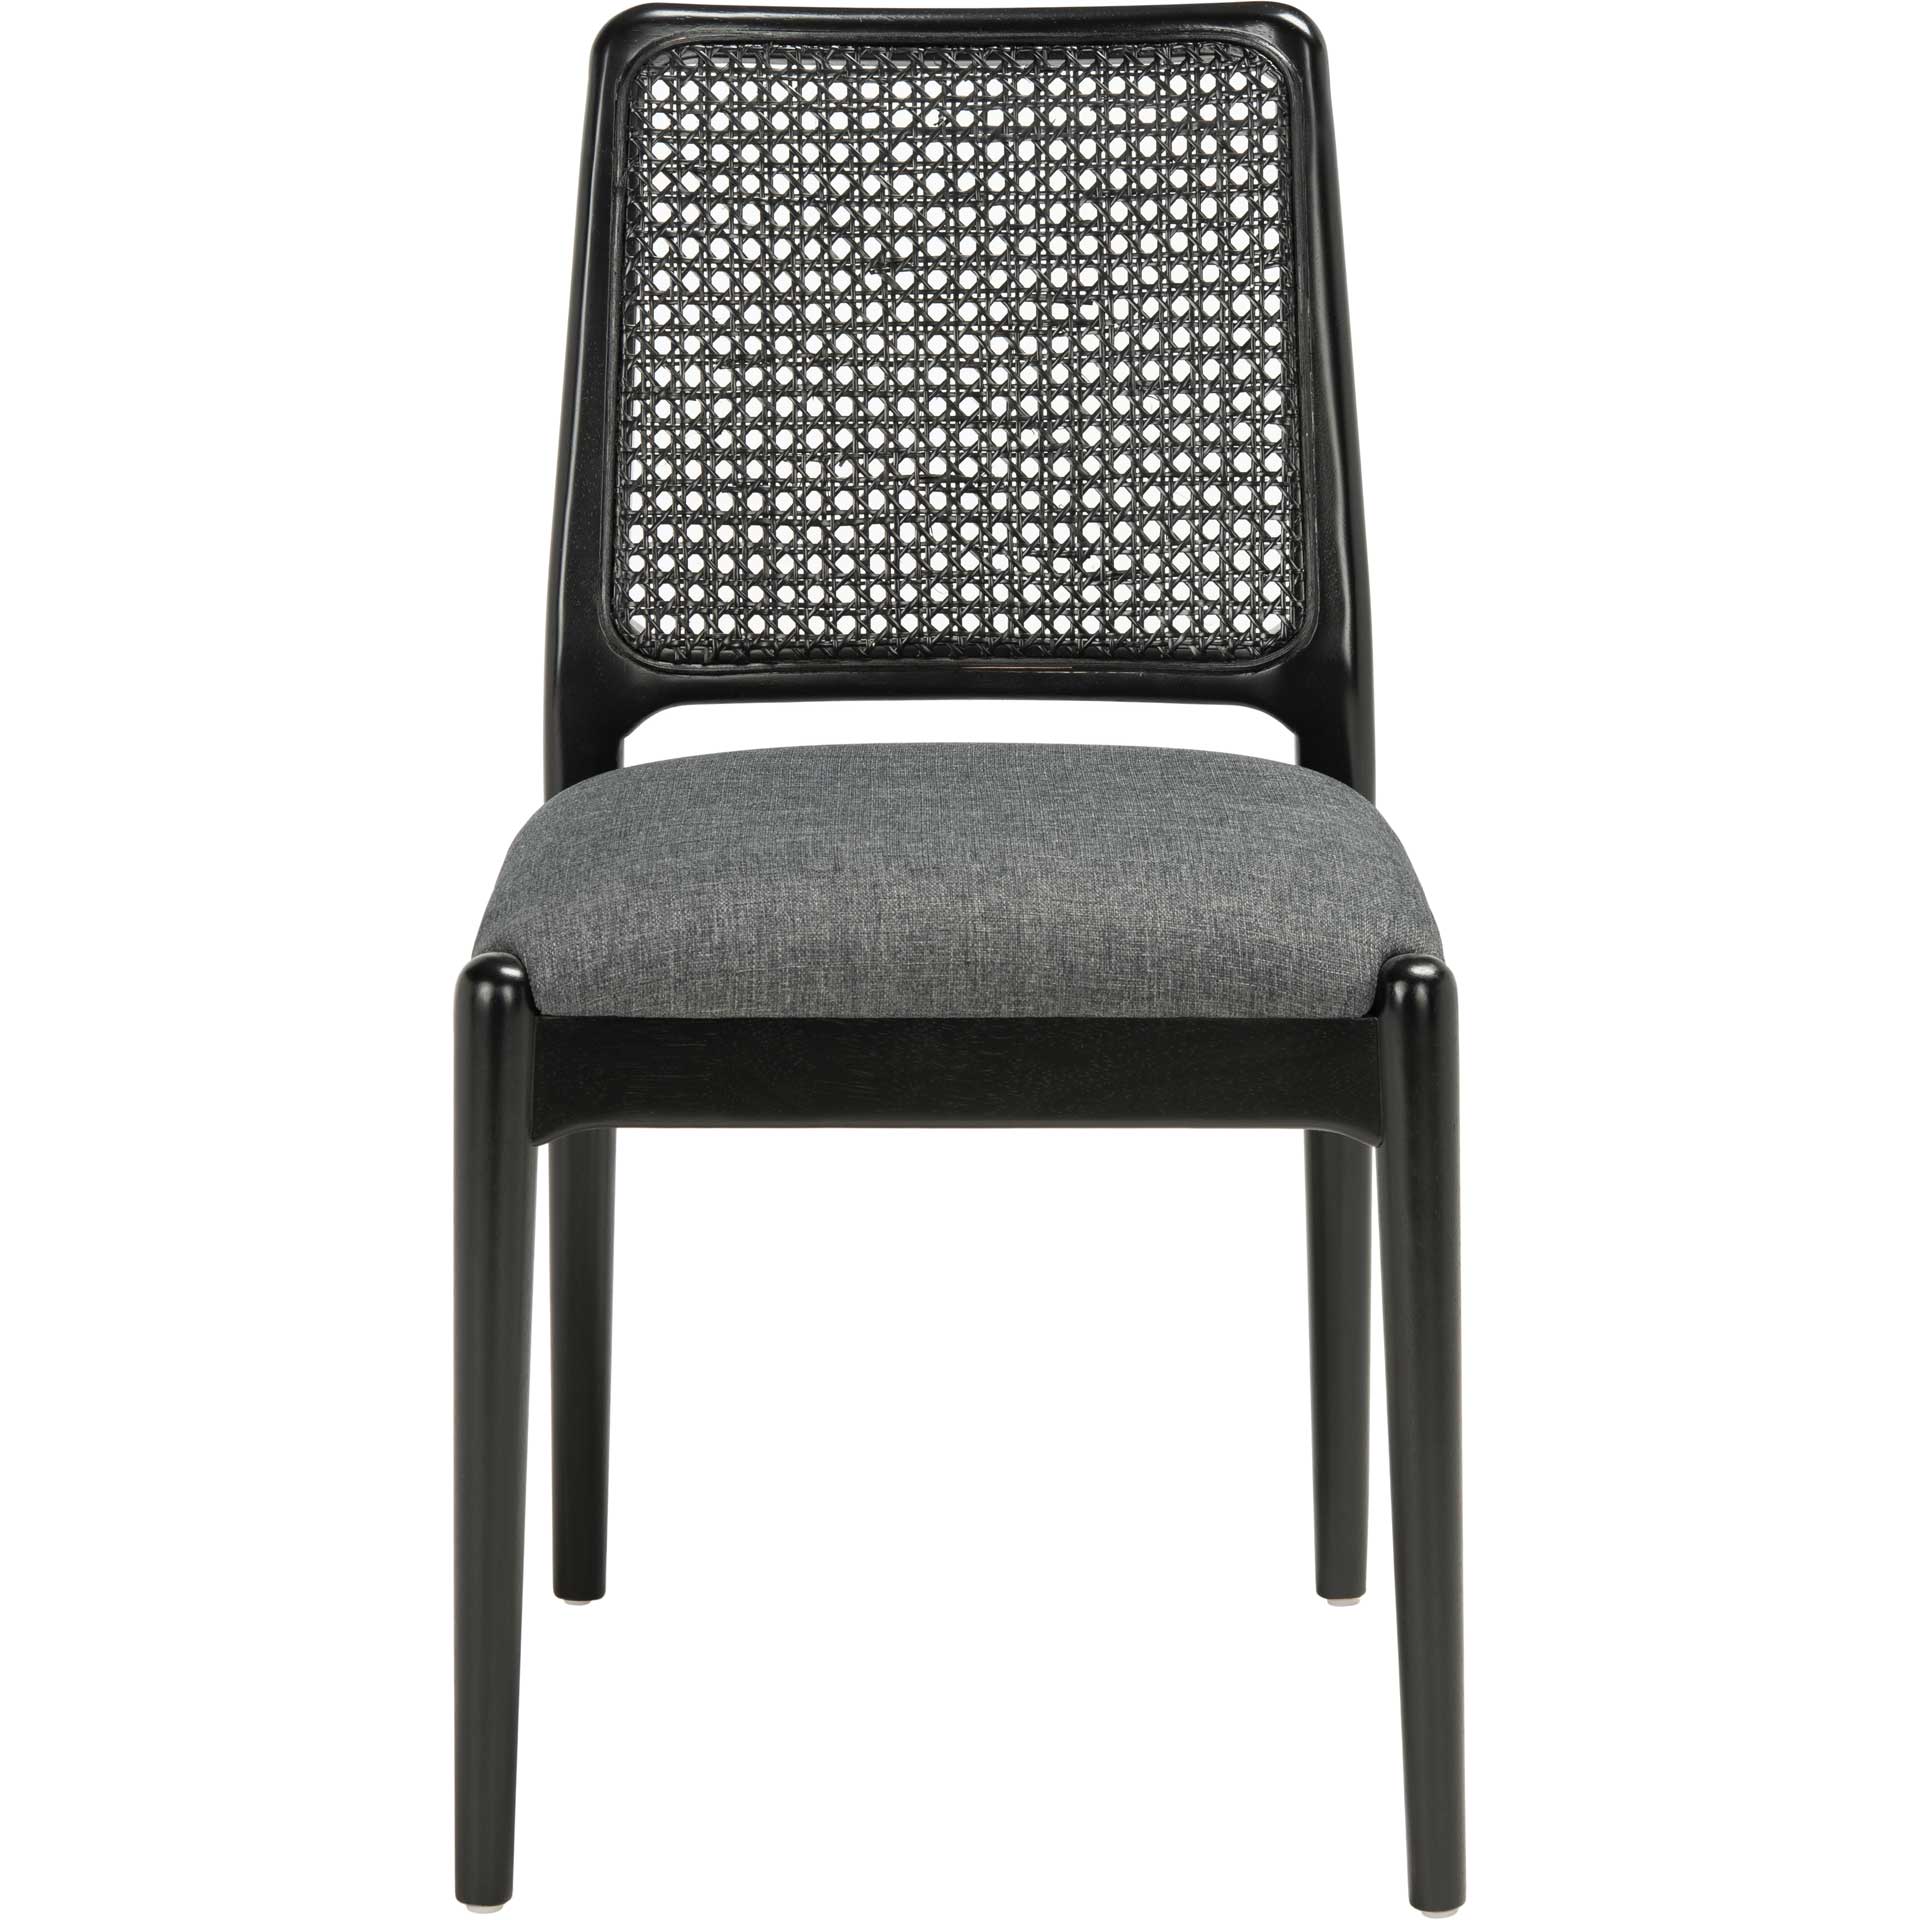 Remi Rattan Dining Chair Black/Gray (Set of 2)